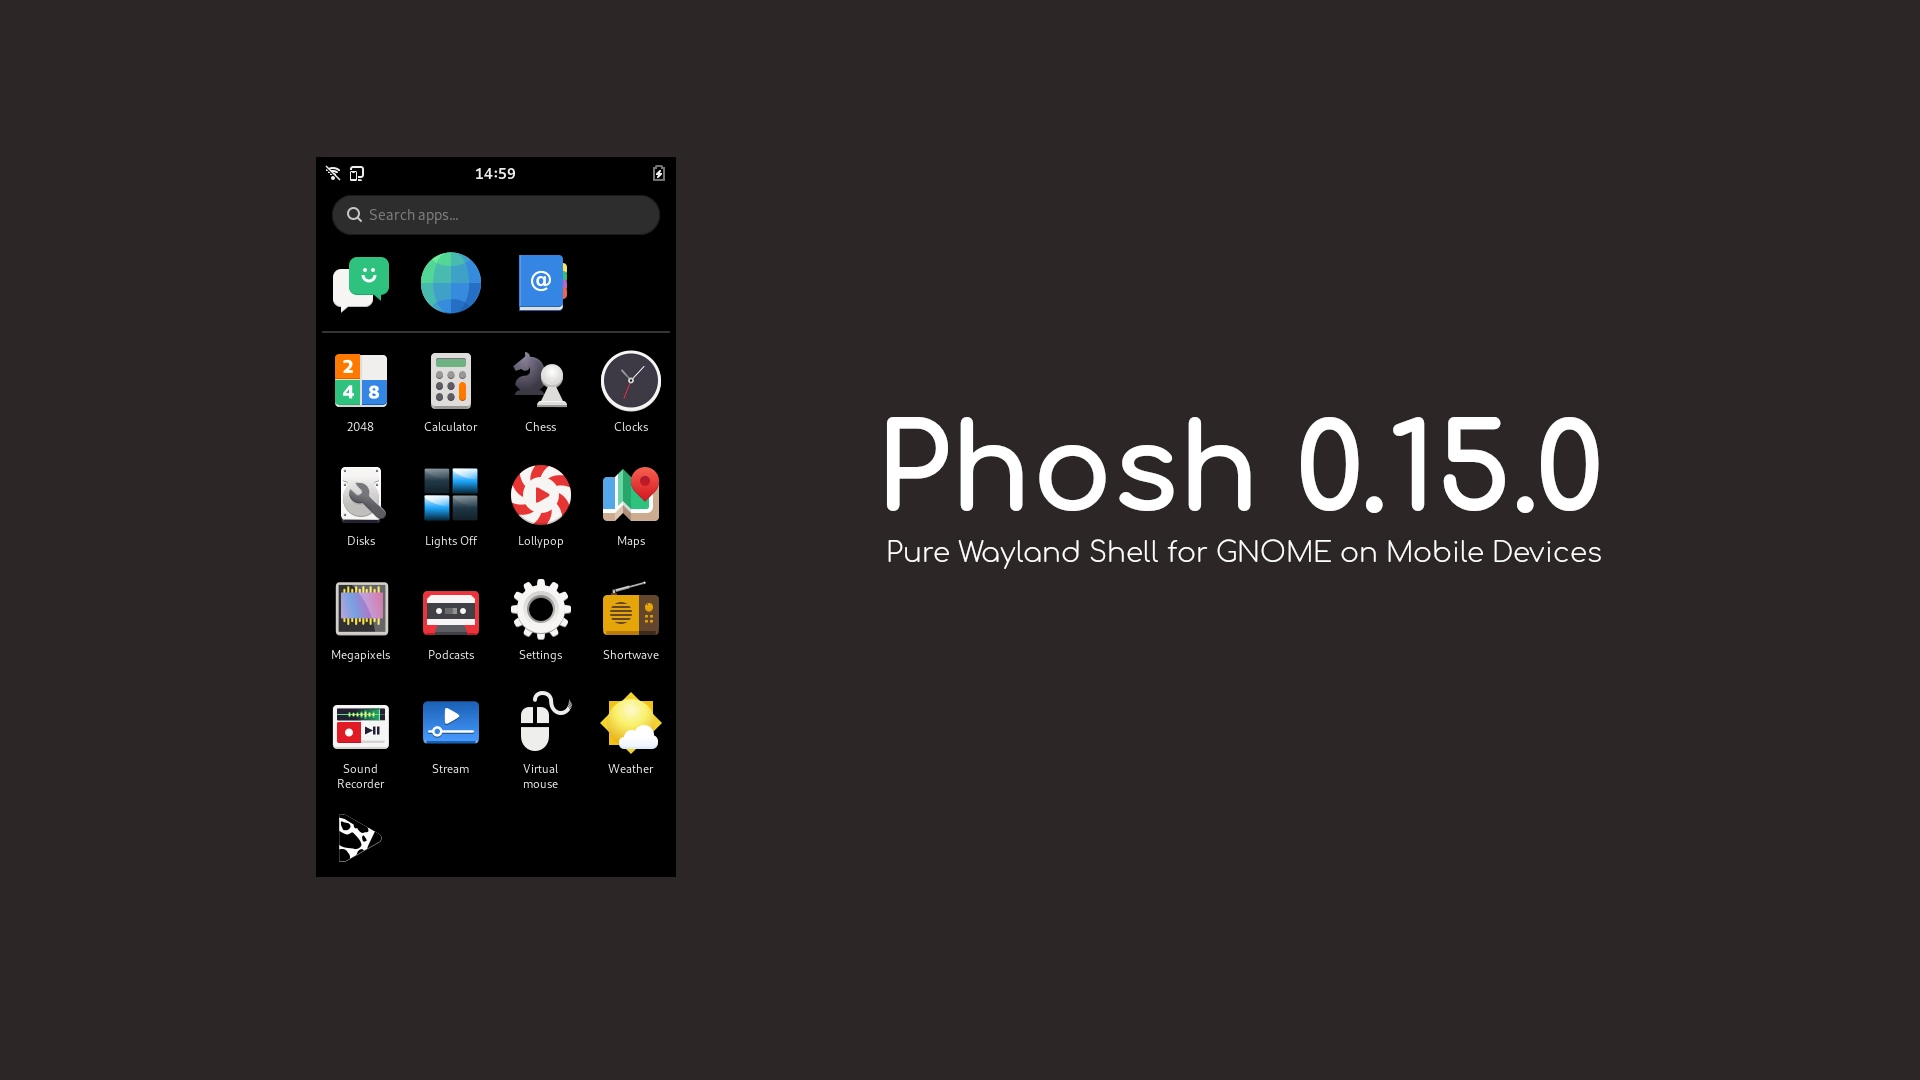 Phosh 0.15.0 Wayland Shell for GNOME on Mobile Devices Adds Full VPN Support, Swipeable Notification Frames